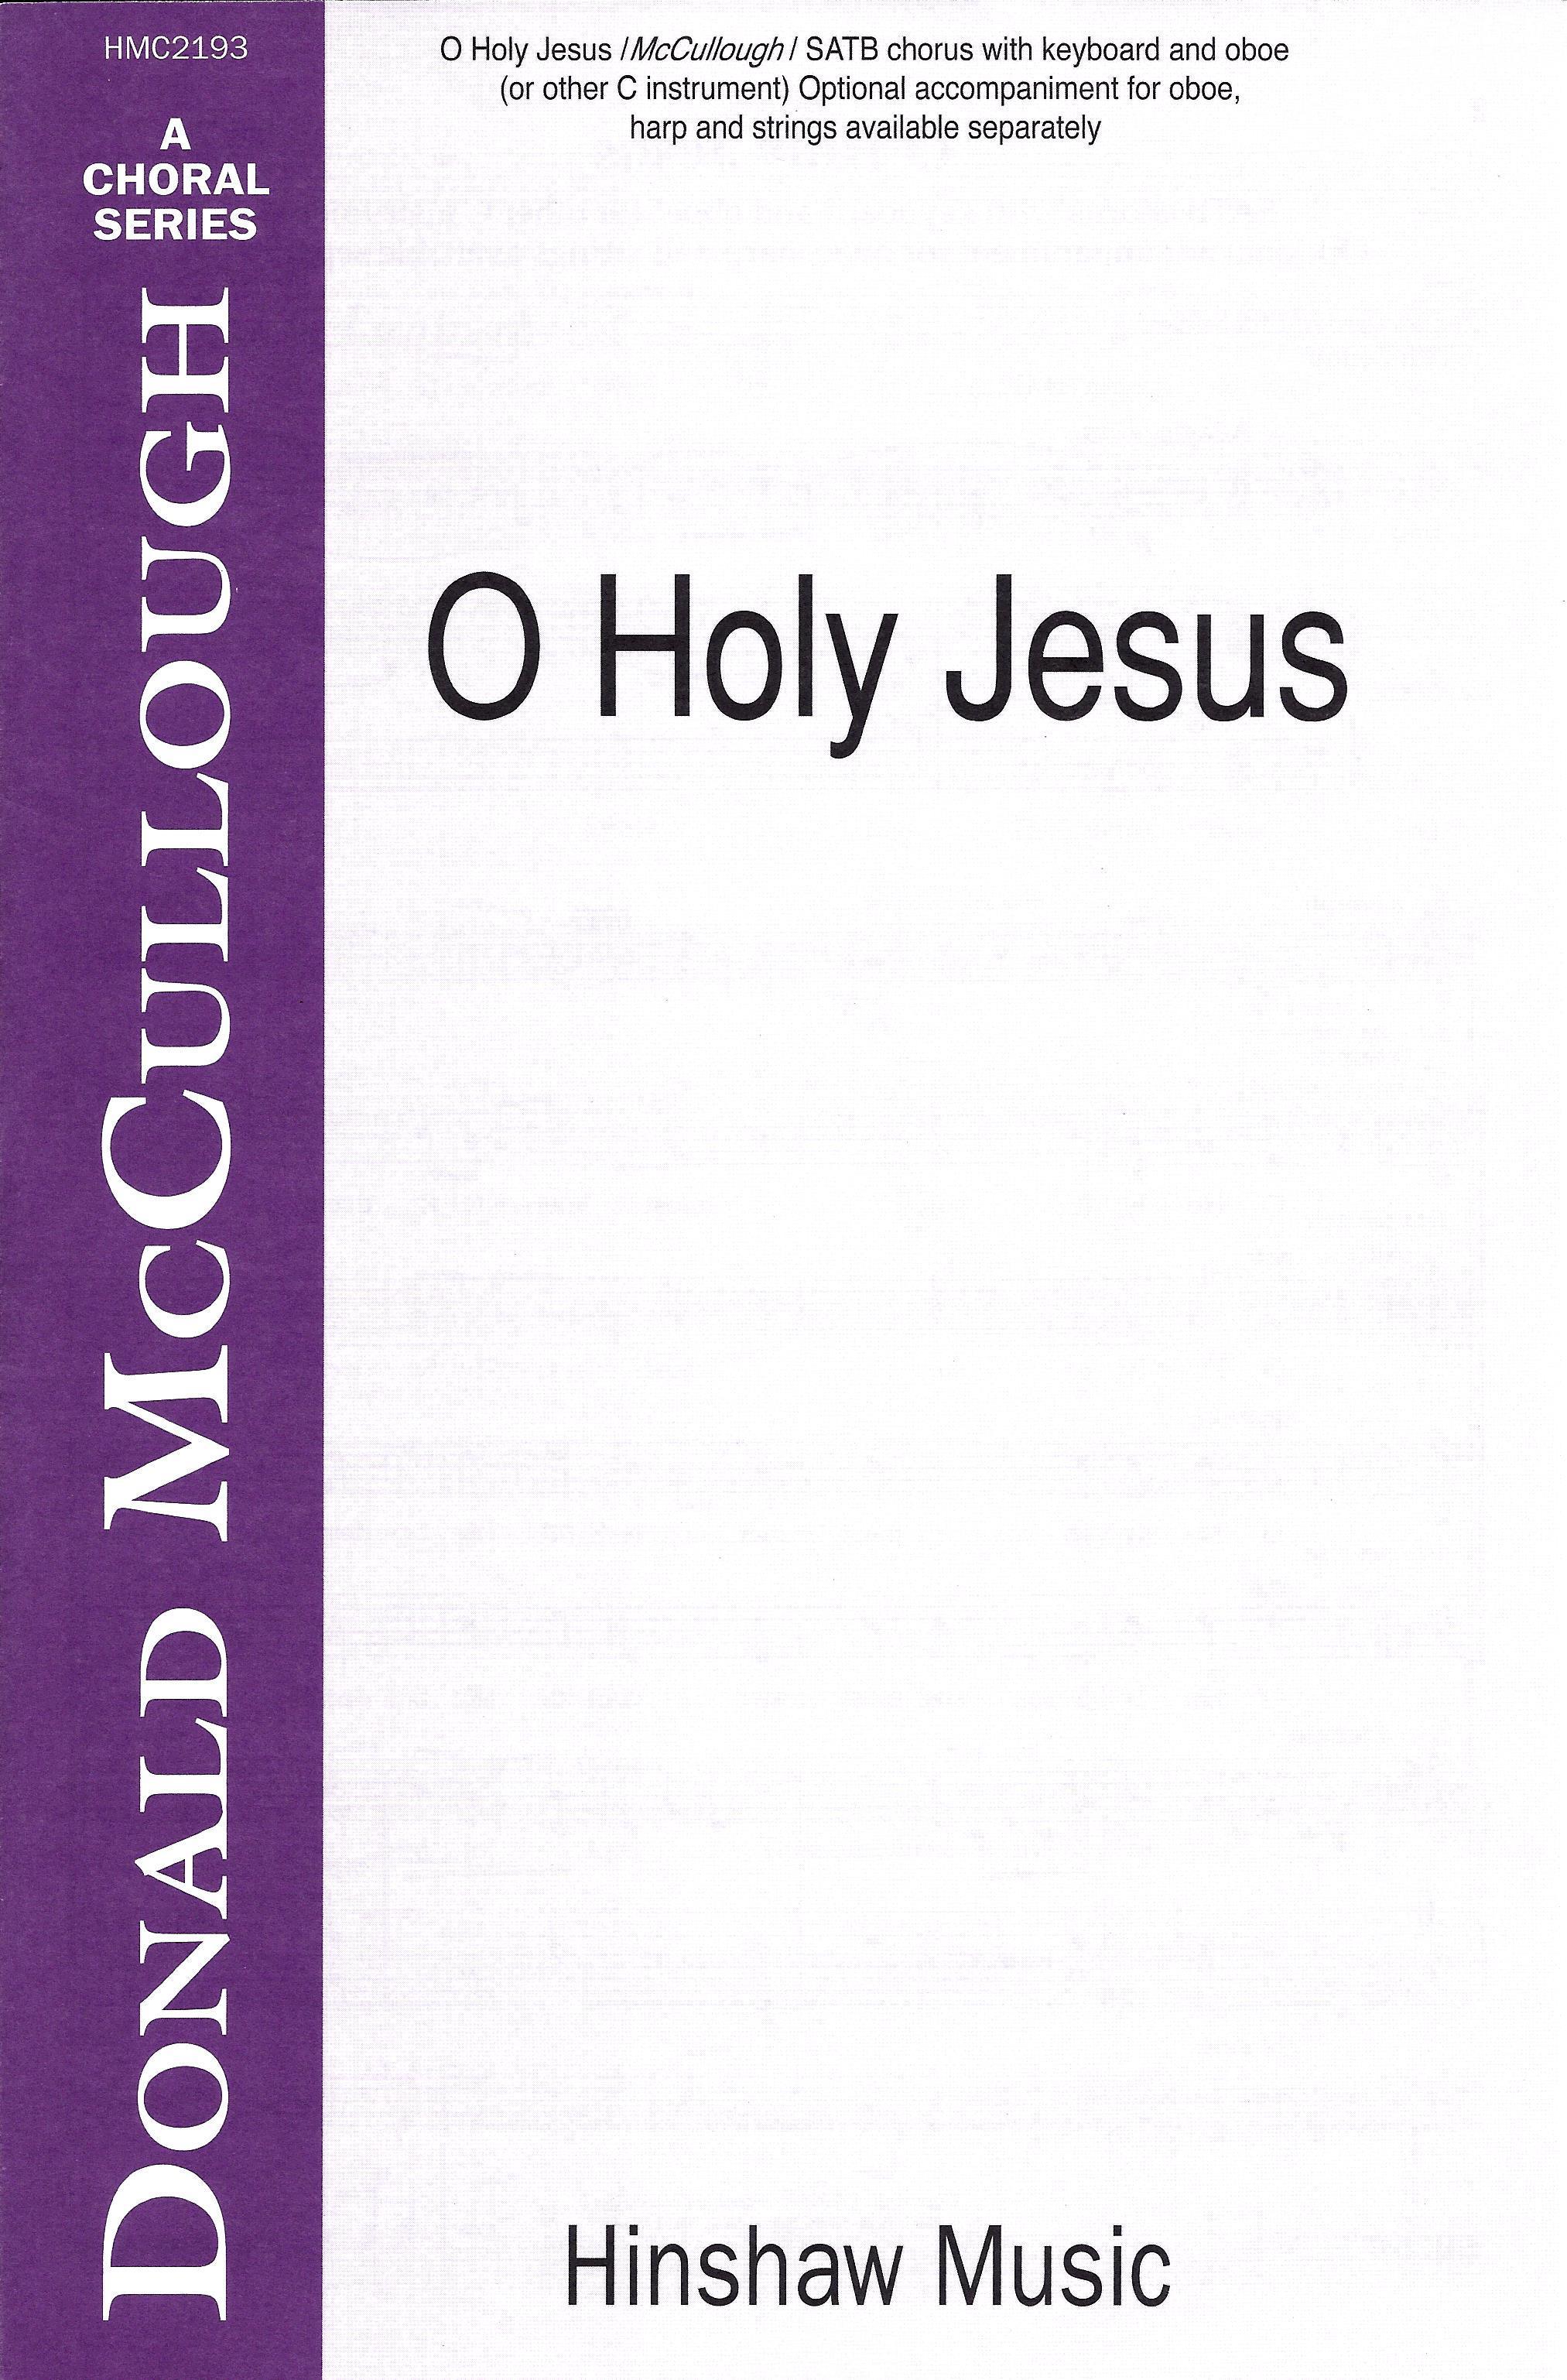 O Holy Jesus - Prayer of St. Richard of Chichester, a musical ...